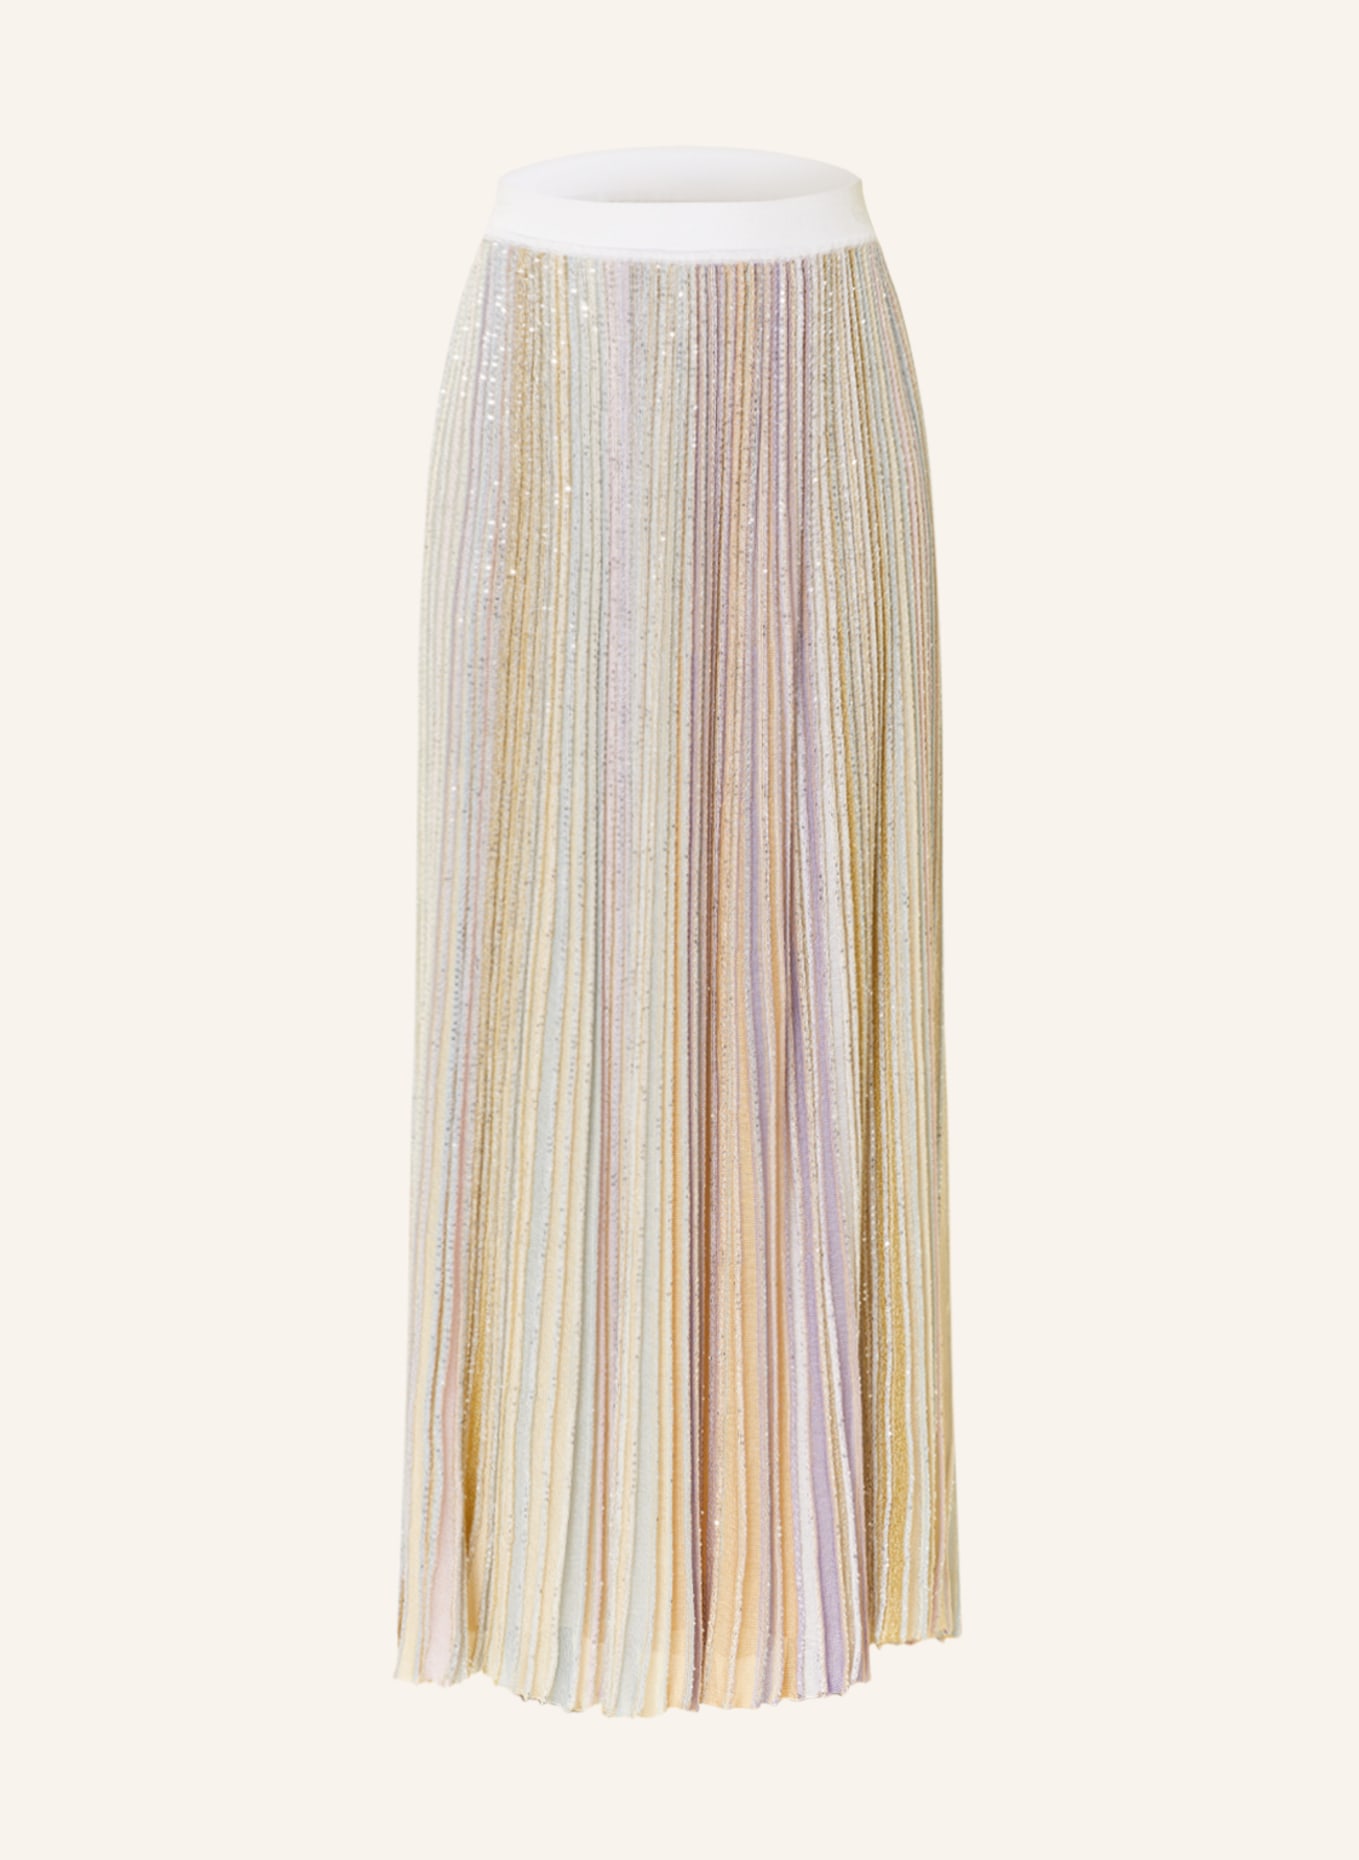 MISSONI Knit skirt with glitter thread and sequins, Color: WHITE/ LIGHT PURPLE/ LIGHT BLUE (Image 1)